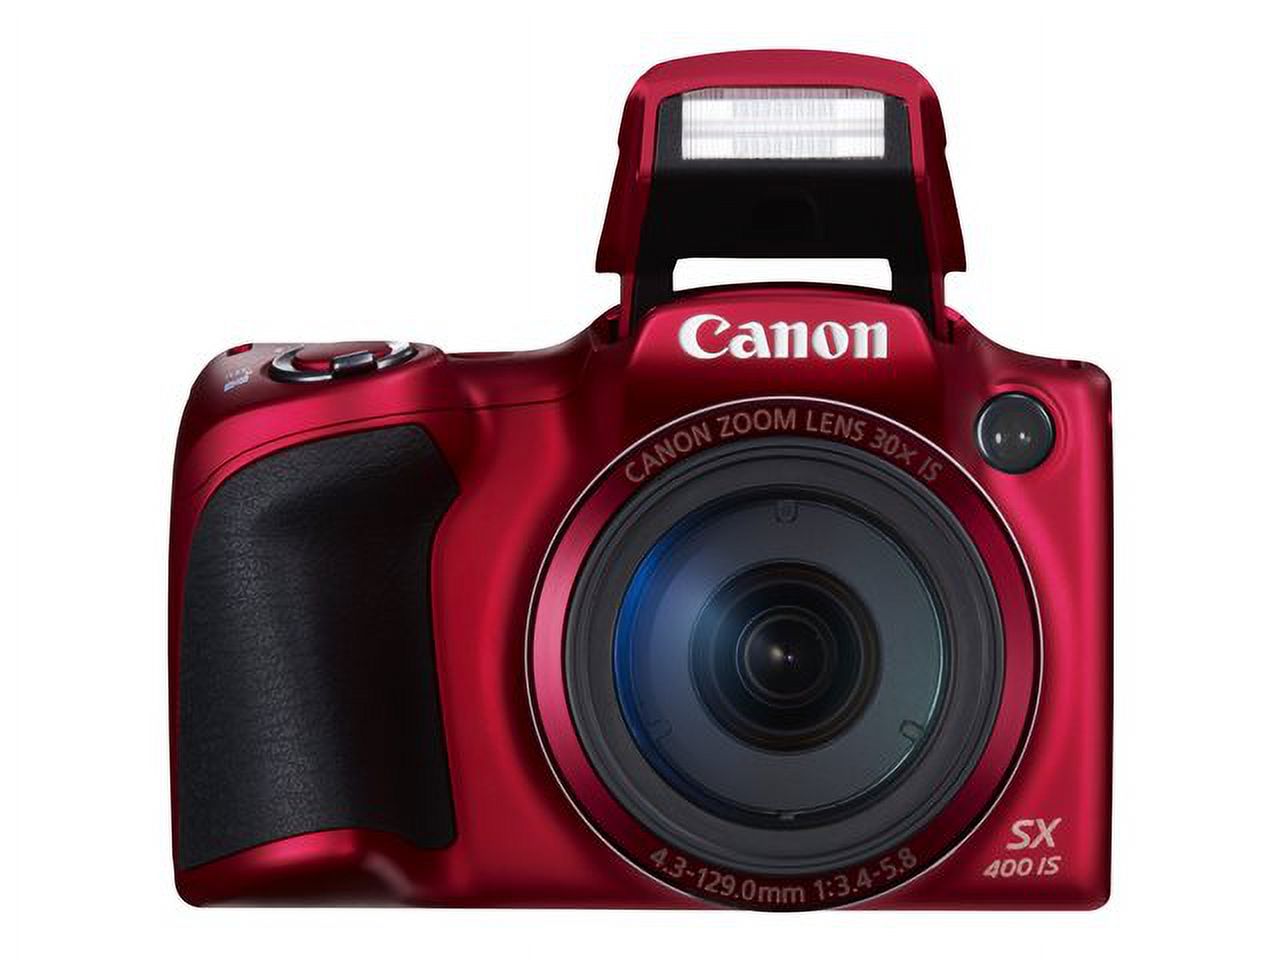 Canon PowerShot SX400 IS - Digital camera - High Definition - compact - 16.0 MP - 30 x optical zoom - red - image 21 of 72